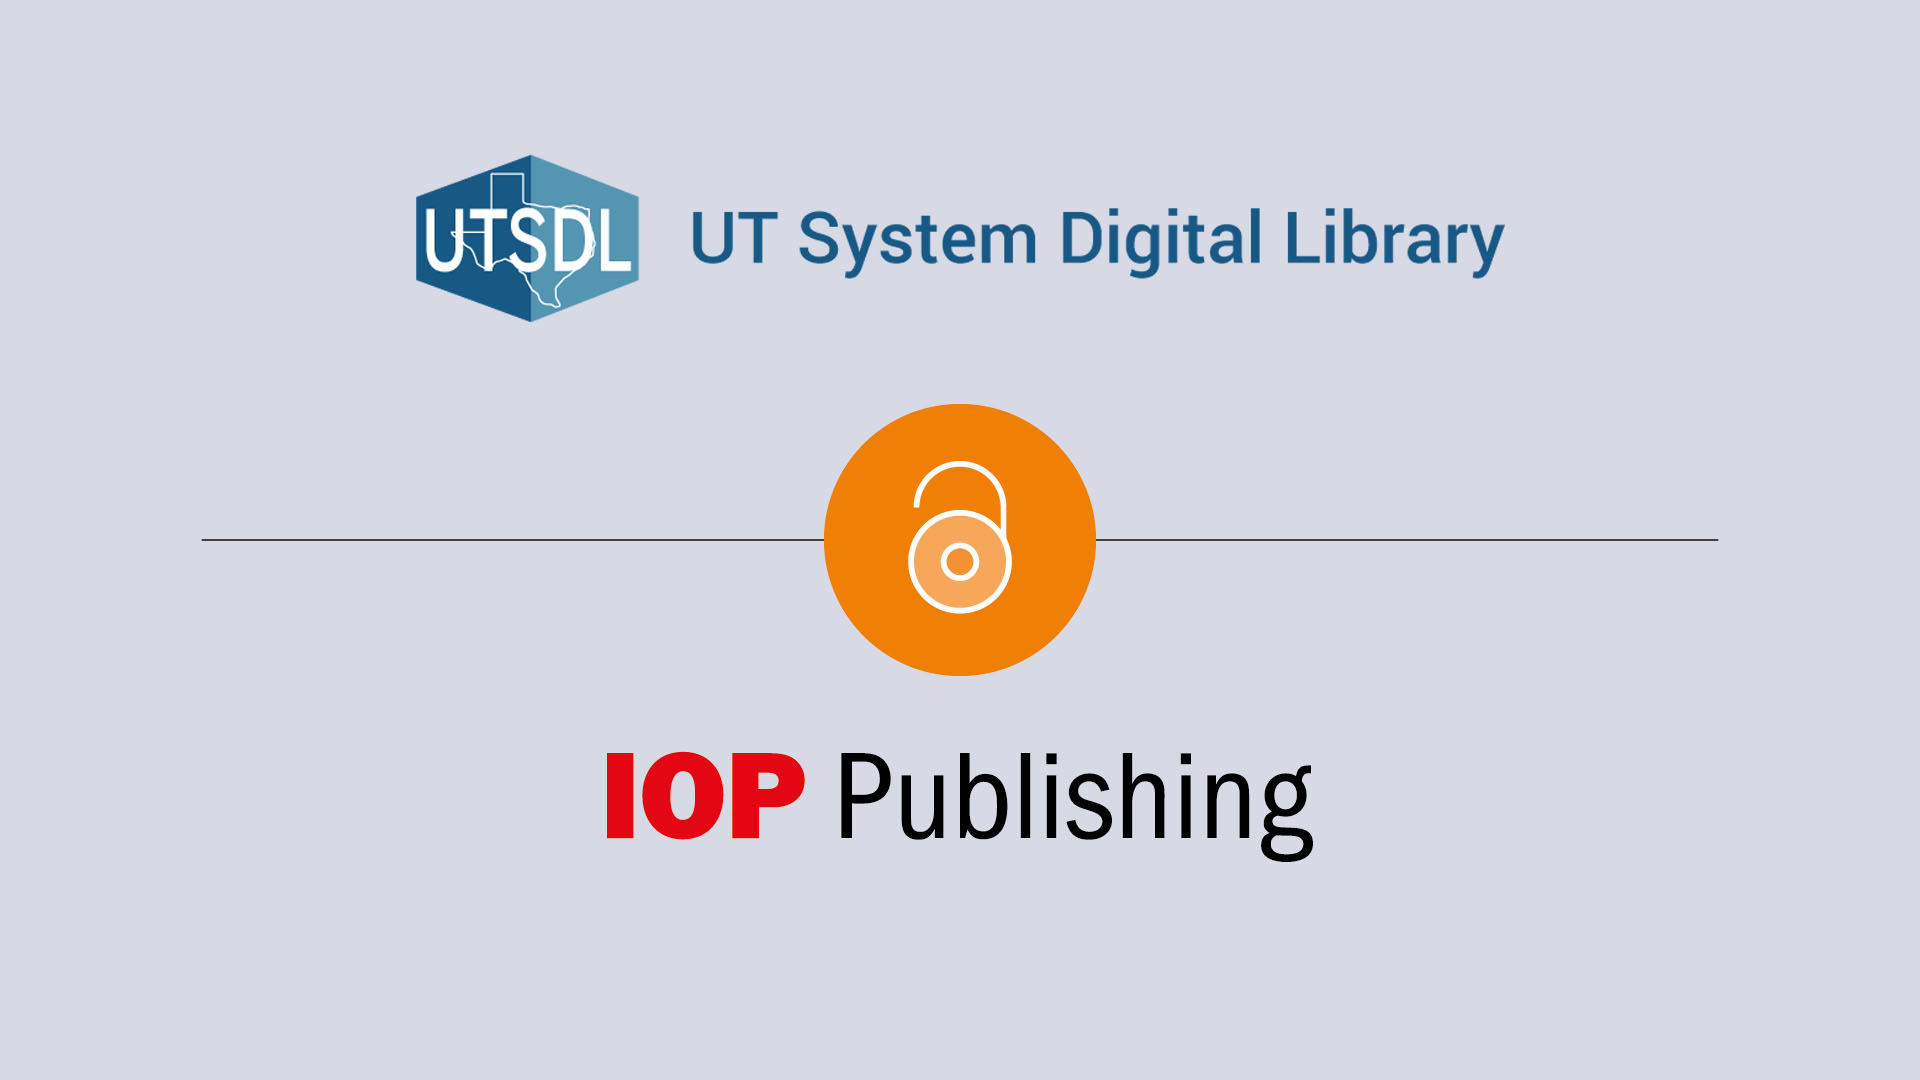 Logos for the UT System Digital Library and IOP Publishing on a gray background